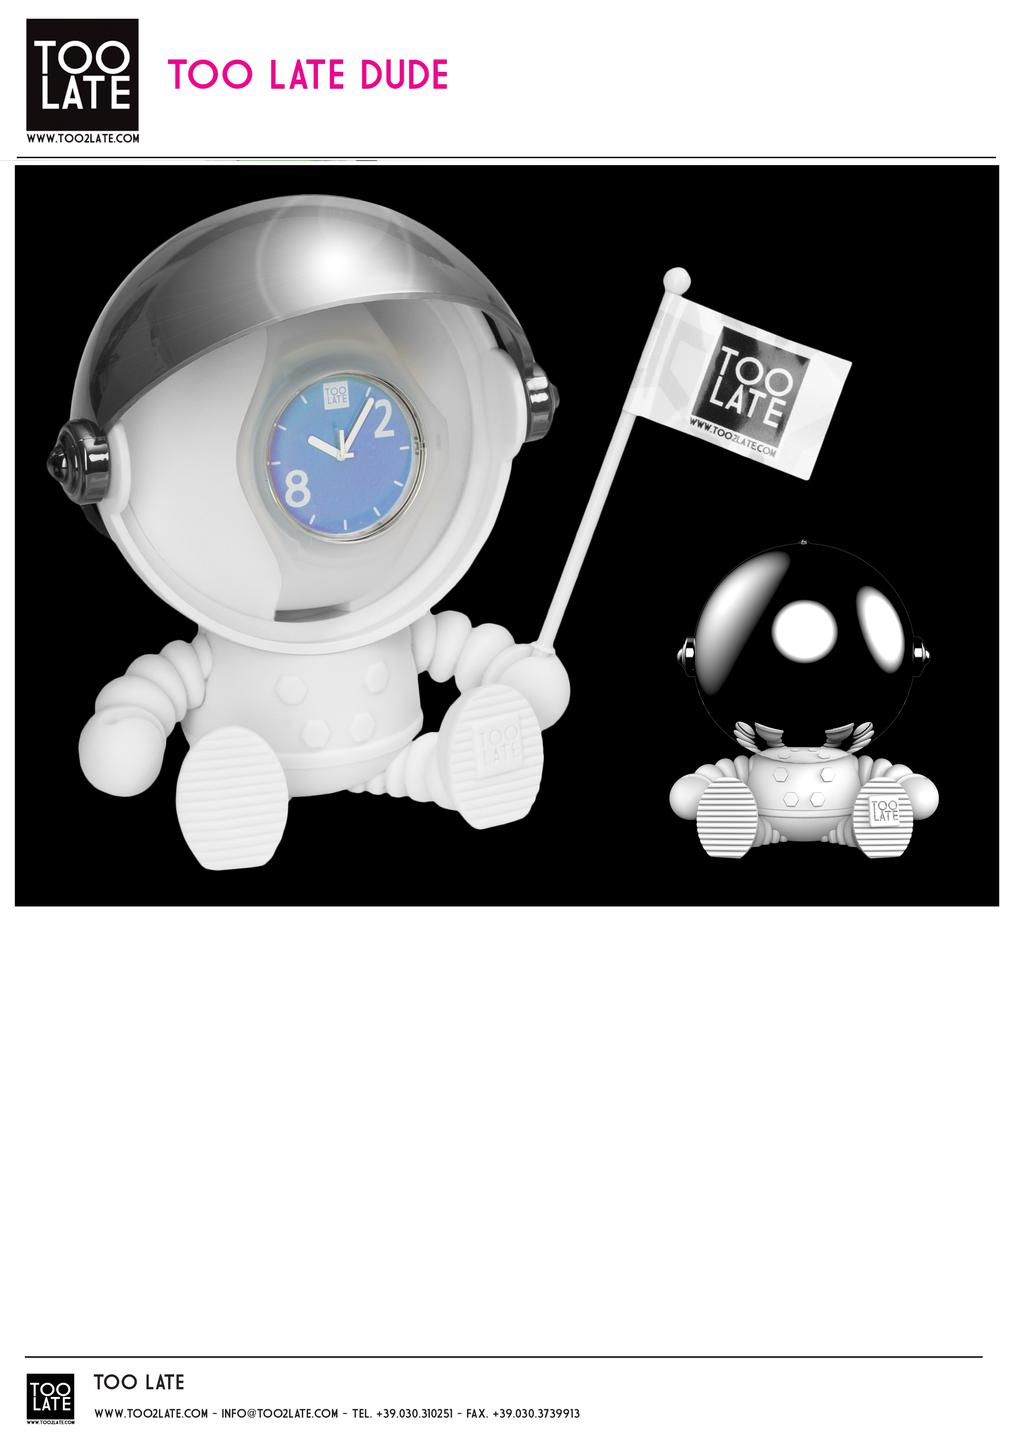 Hey Dude! It has arrived straight from the TOO LATE planet. A cute mascot and innovative packaging for your TOO LATE WATCH.